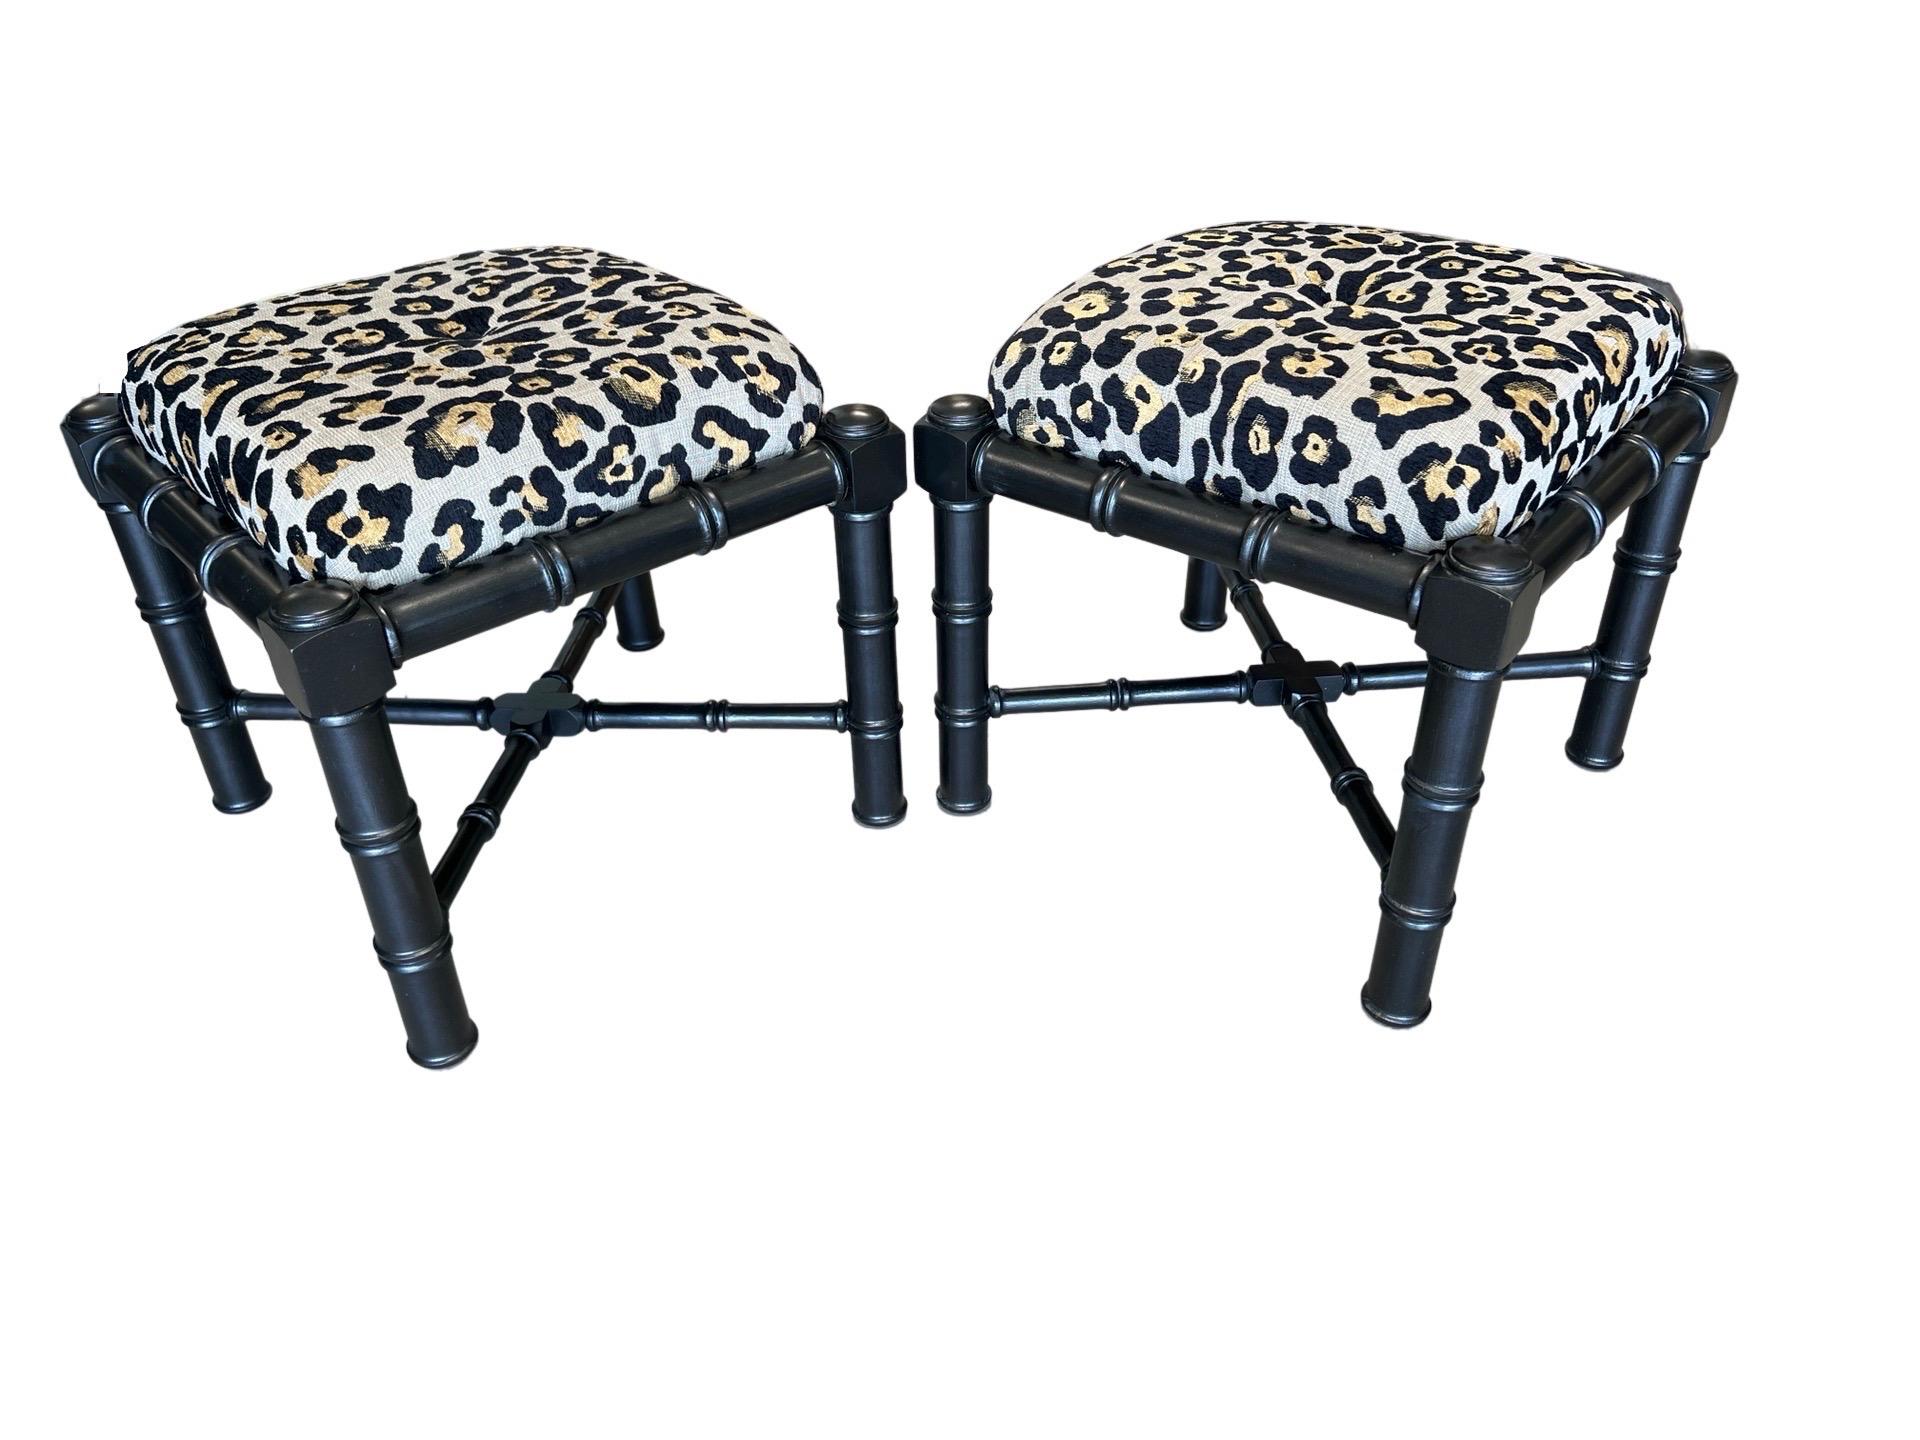 A pair of Vintage faux bamboo carved stools or footrests. Each with a black Ebonized finish to the body, x-cross support and upholstered in a leopard fabric. Unmarked.